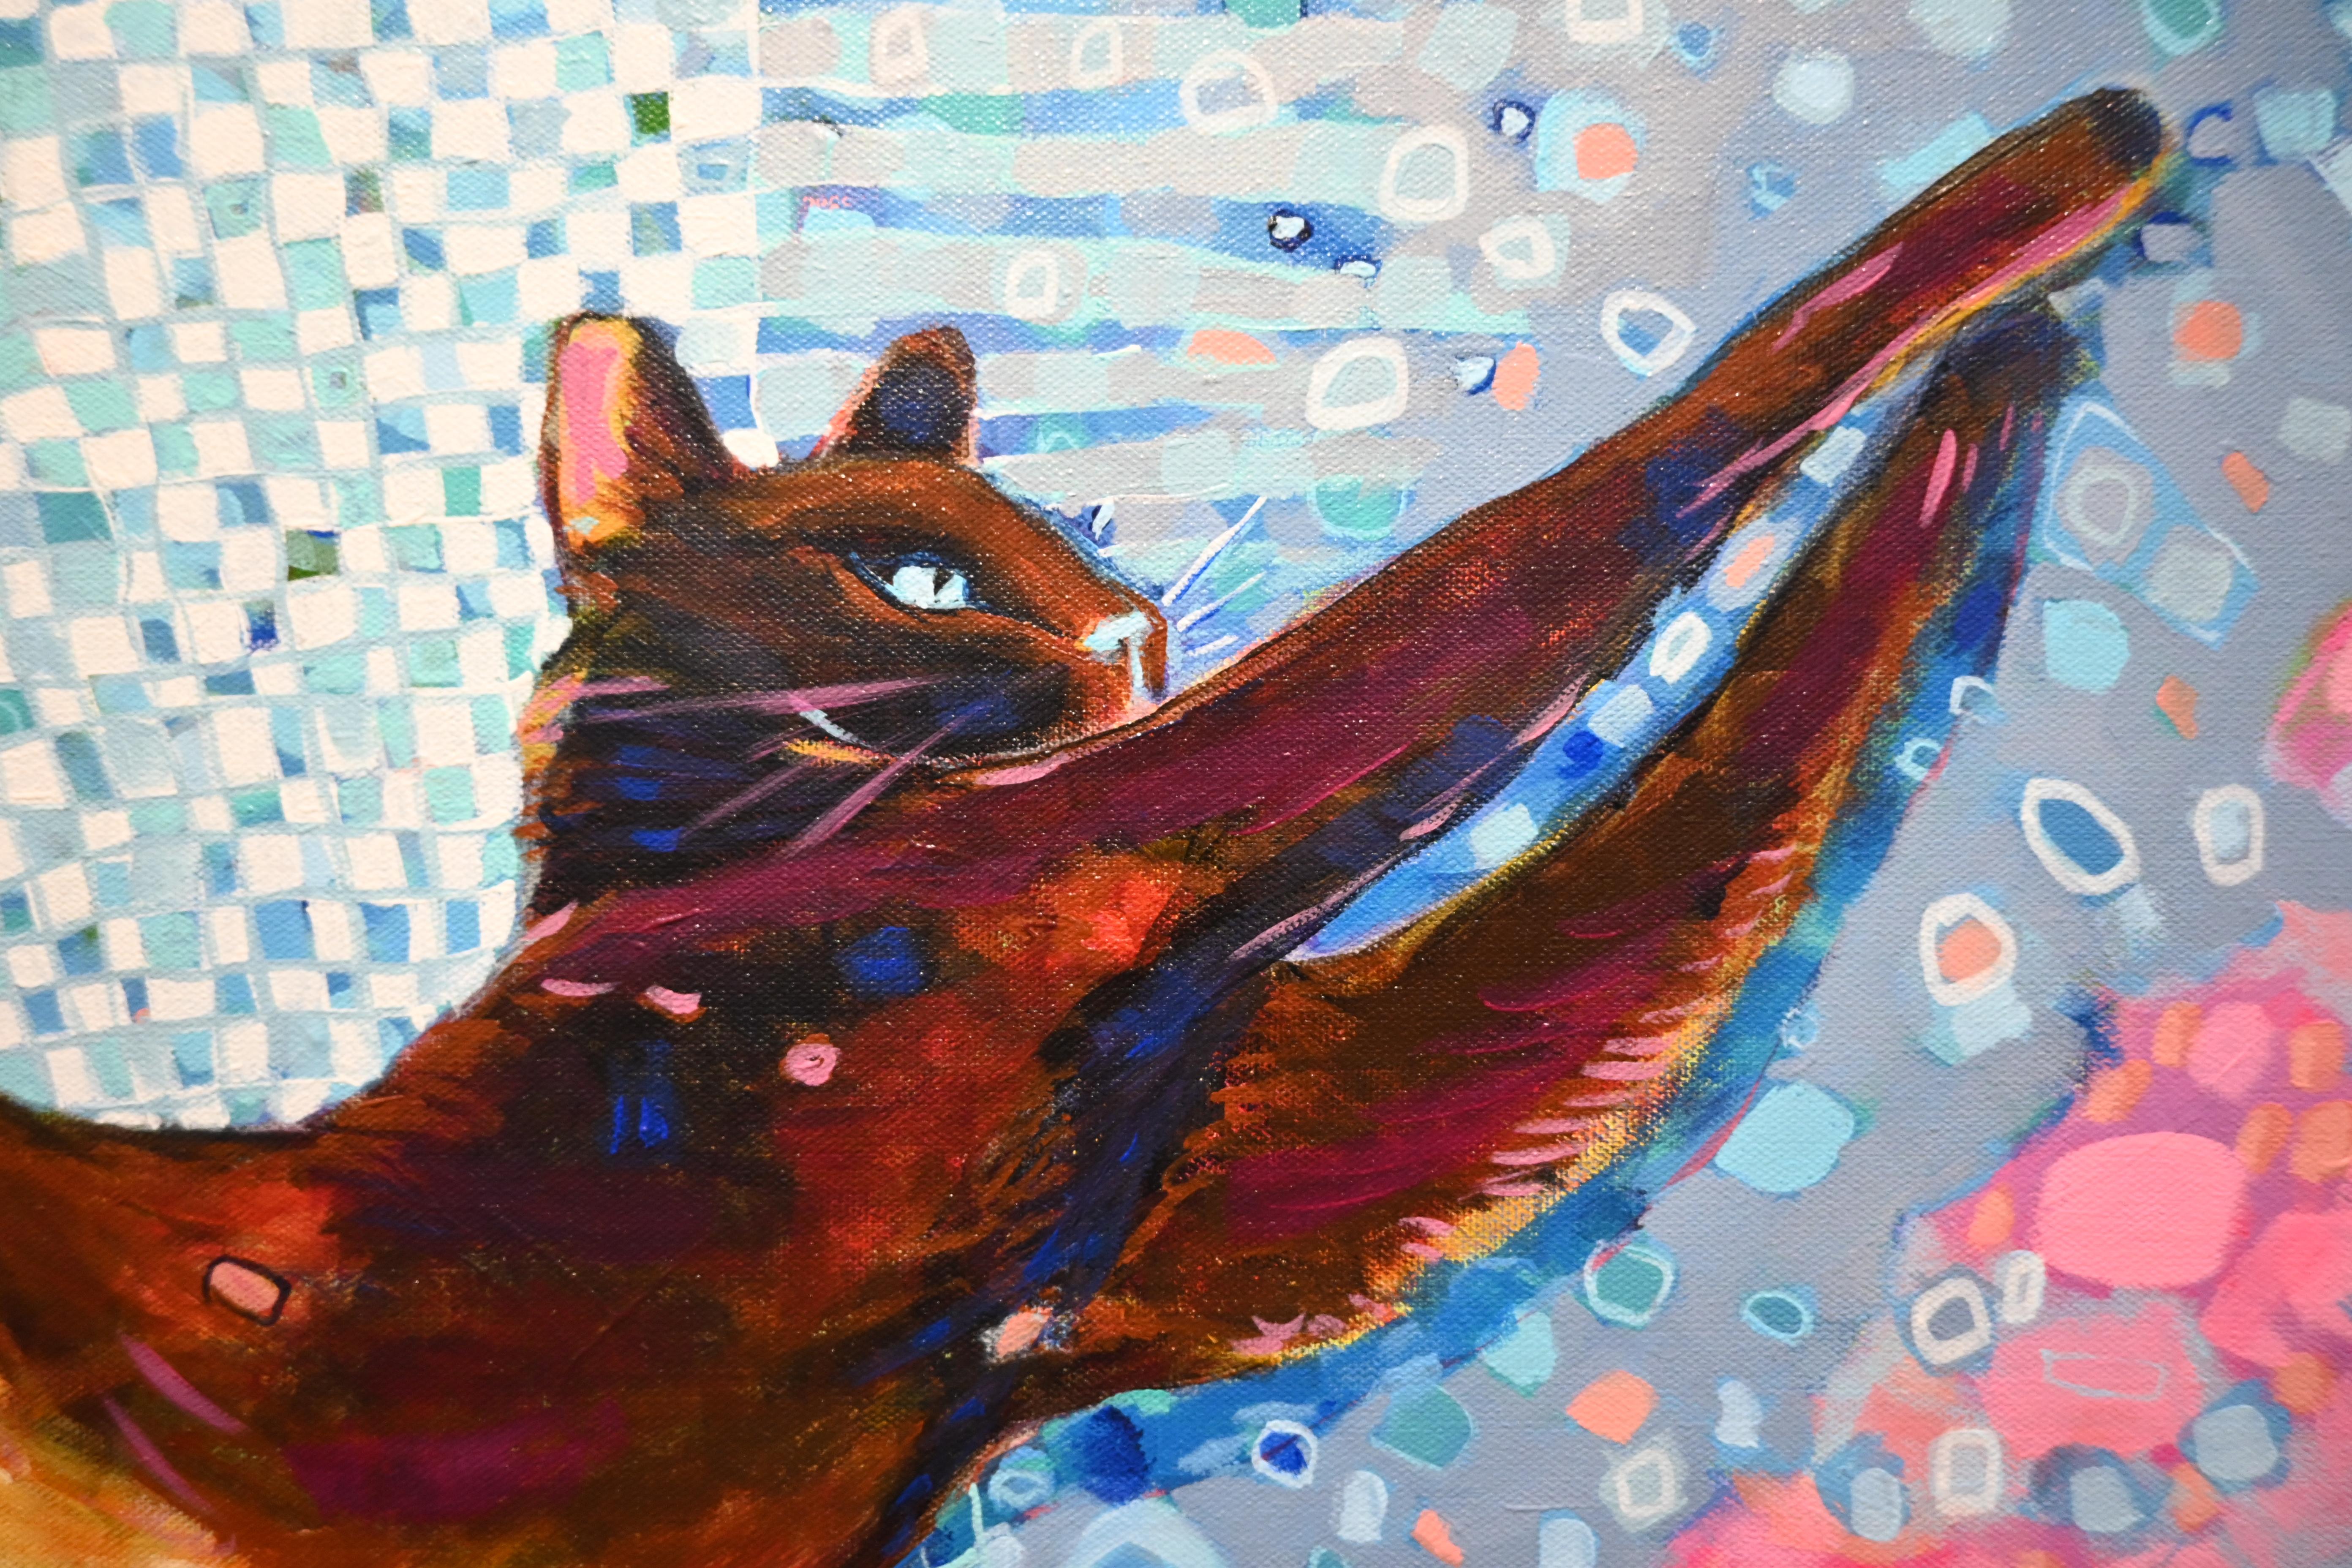 Cat's Dream - Bright & Playful Contemporary Art / Acrylic Paint on Canvas 5